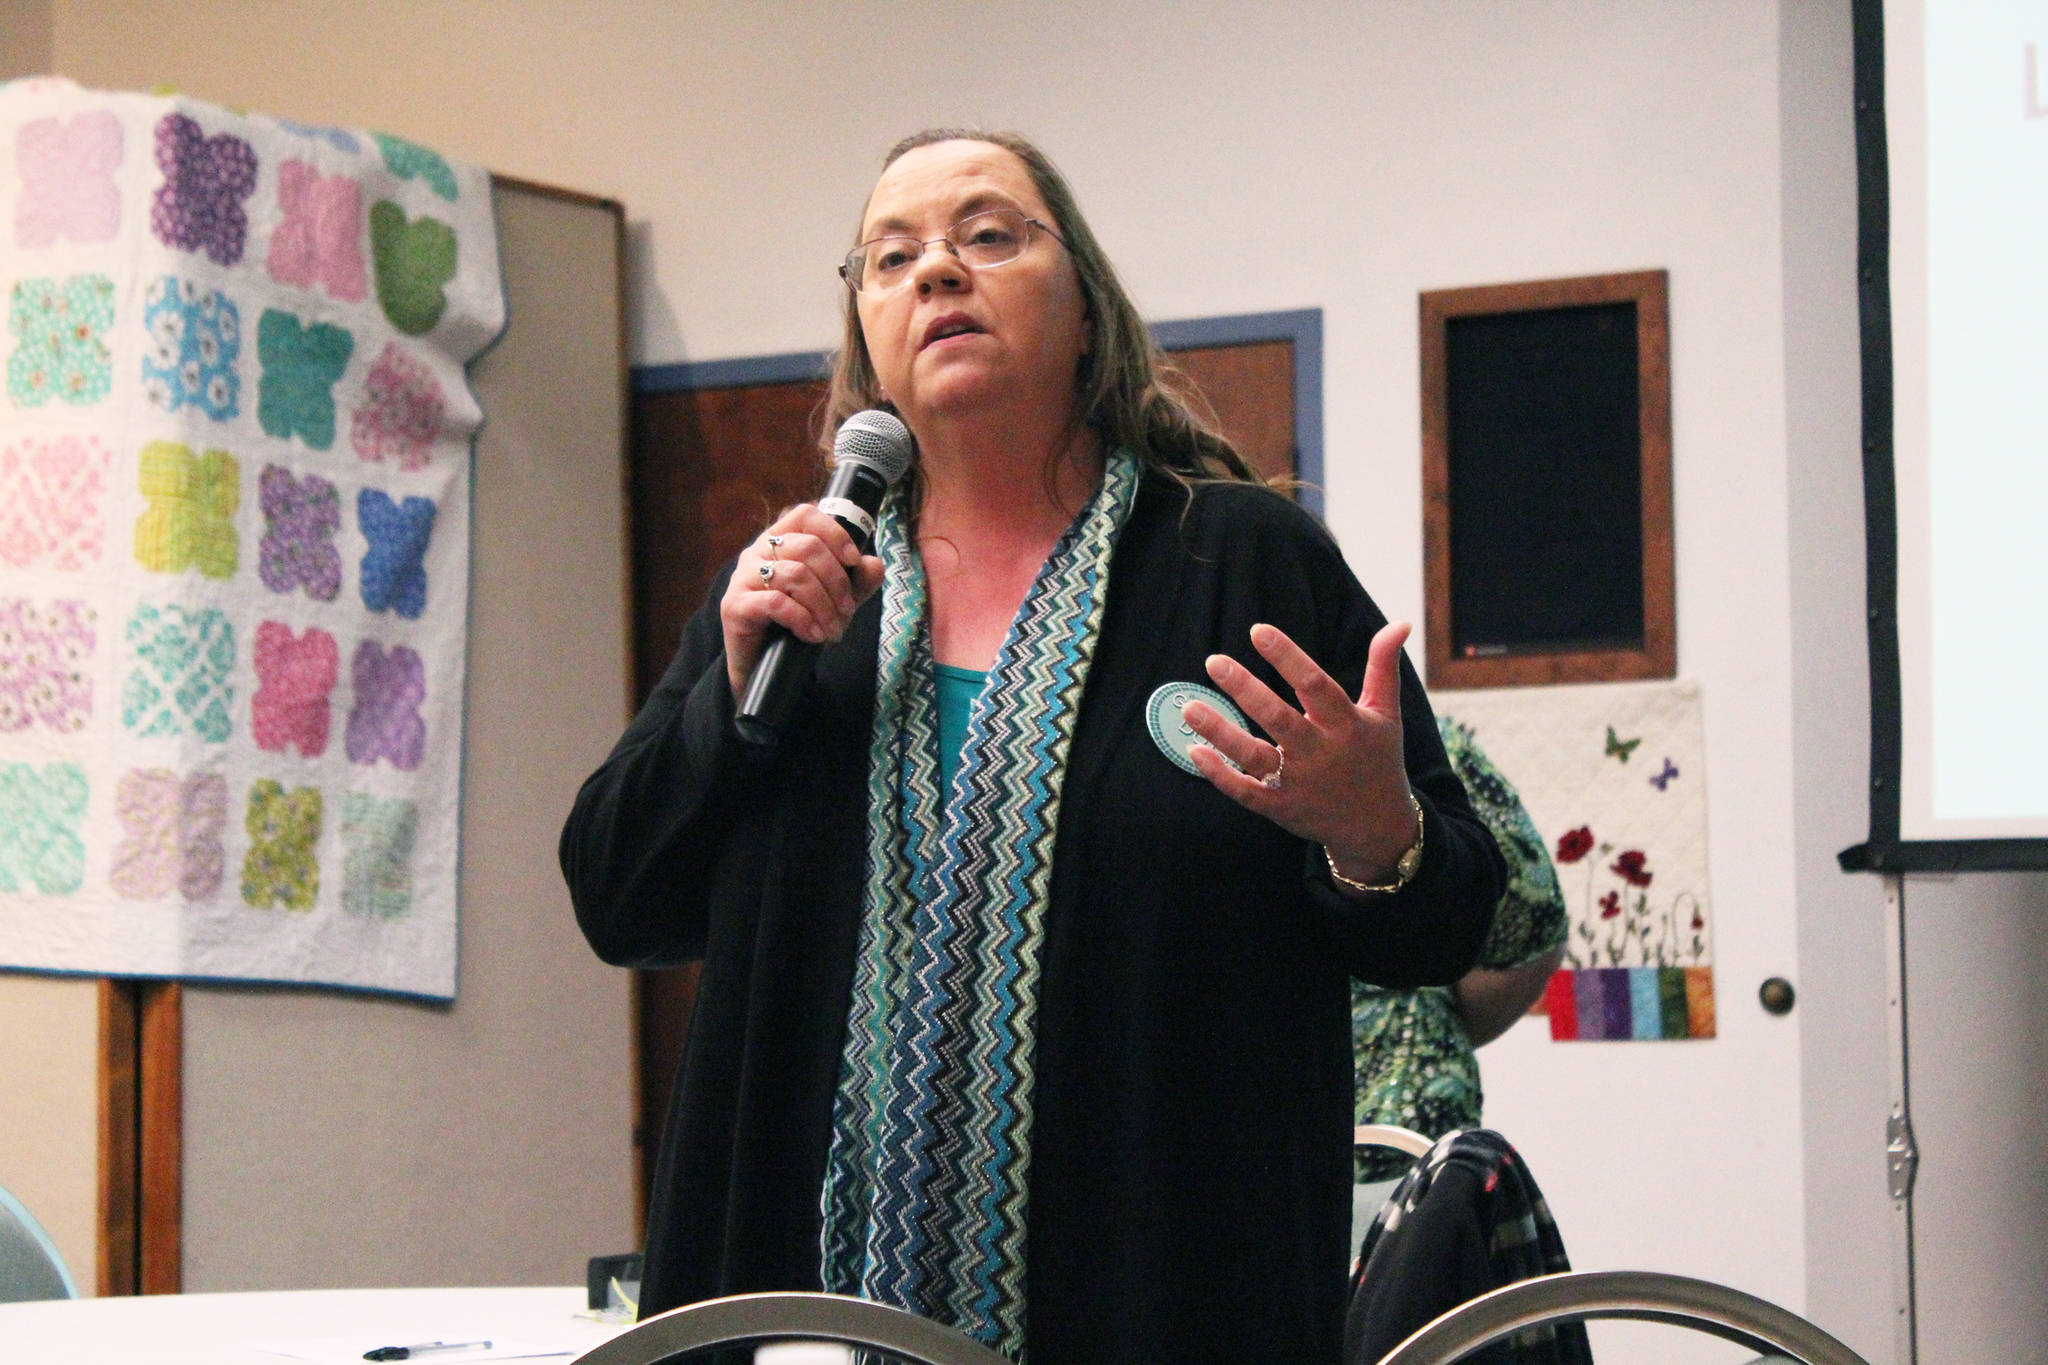 Renee Lipps of the LeeShore Center speaks to an audience about the Green Dot program that addresses violence within communities during the annual Choose Respect event Thursday, March 30, 2017 at the Kenai Chamber of Commerce and Visitor Center in Kenai, Alaska. (Megan Pacer/Peninsula Clarion)